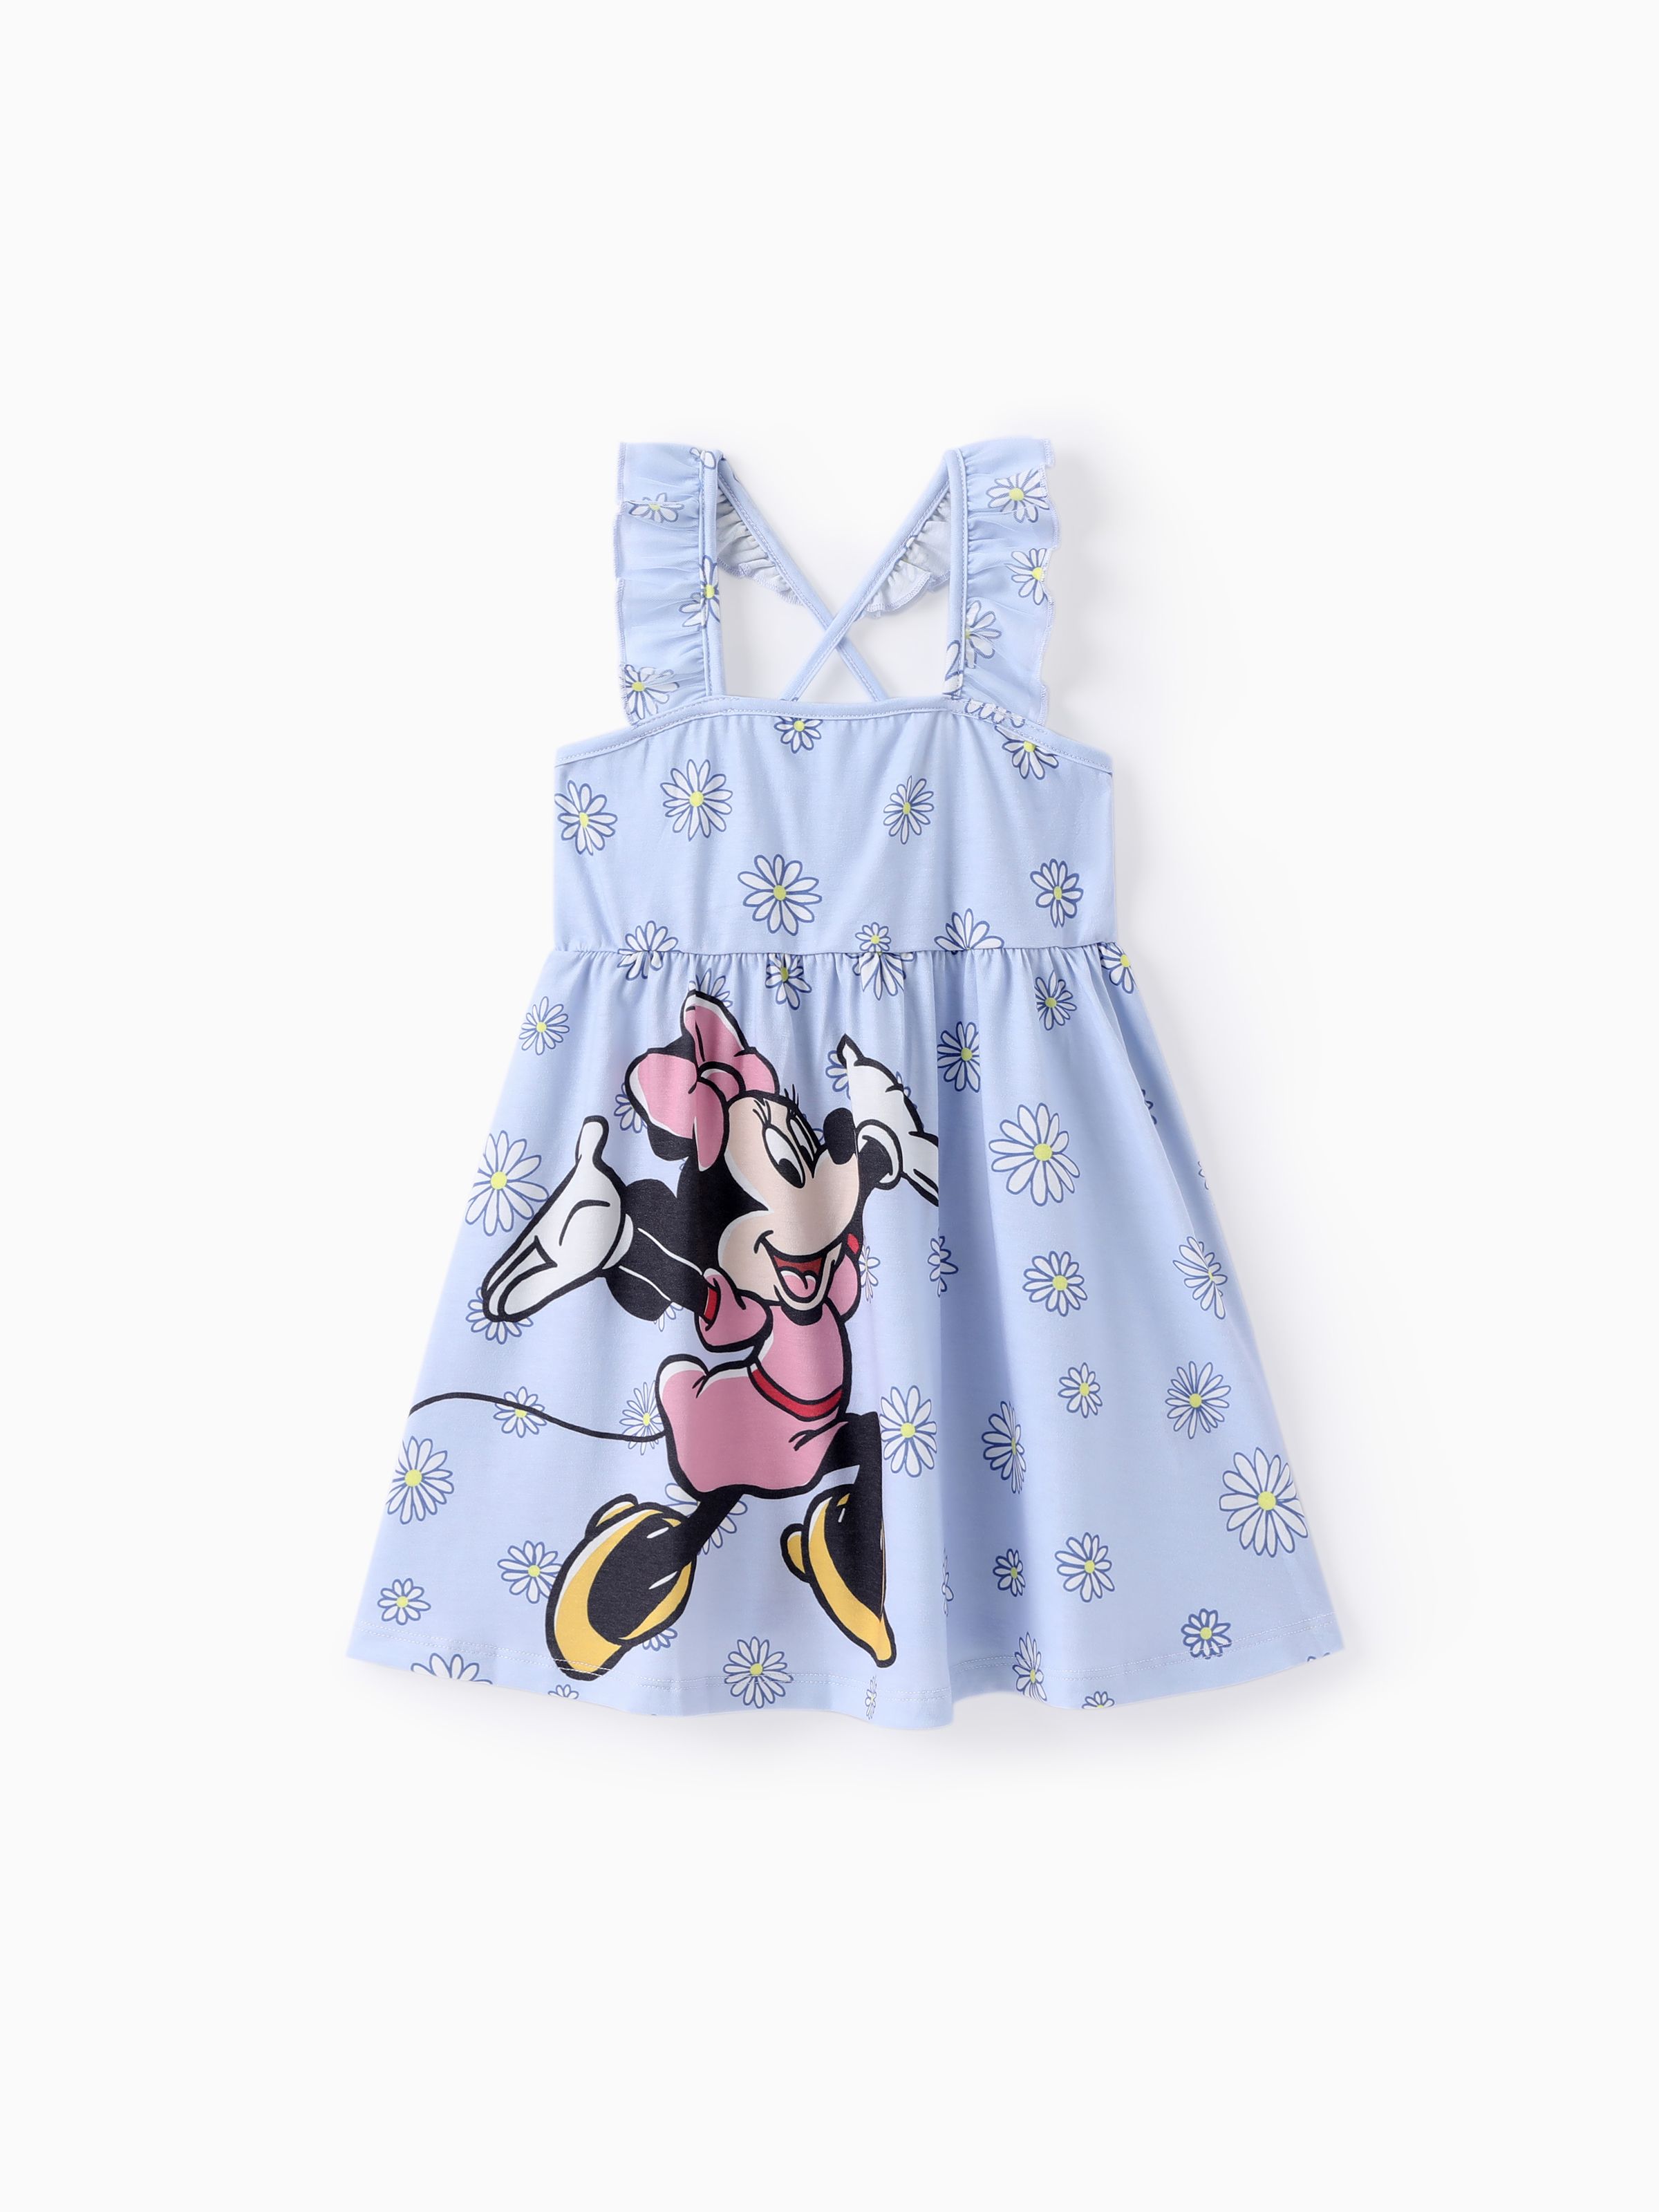 

Disney Mickey and Friends Toddler Girl Floral Naia™ Character Print Dress